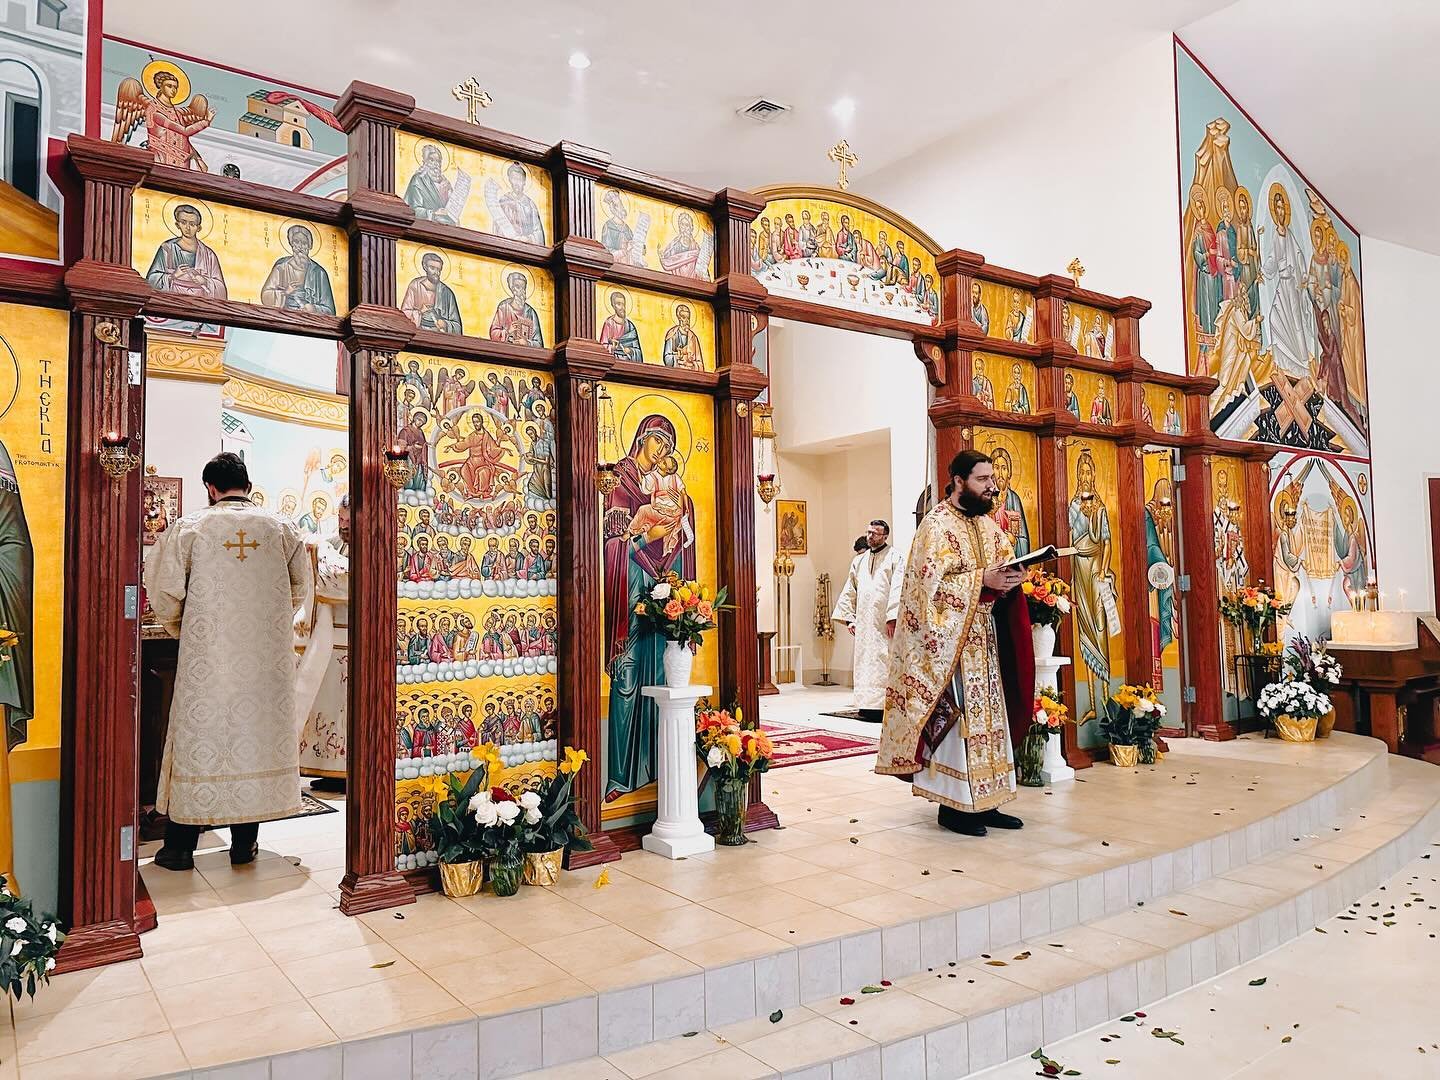 ✨Bright Monday ✨

There are some notable changes that happen during Bright Week + the Paschal season:

✨The services of Bright Week are done with the Royal Doors fully open (the doors in the middle). This unblocked view of the altar symbolizes the op